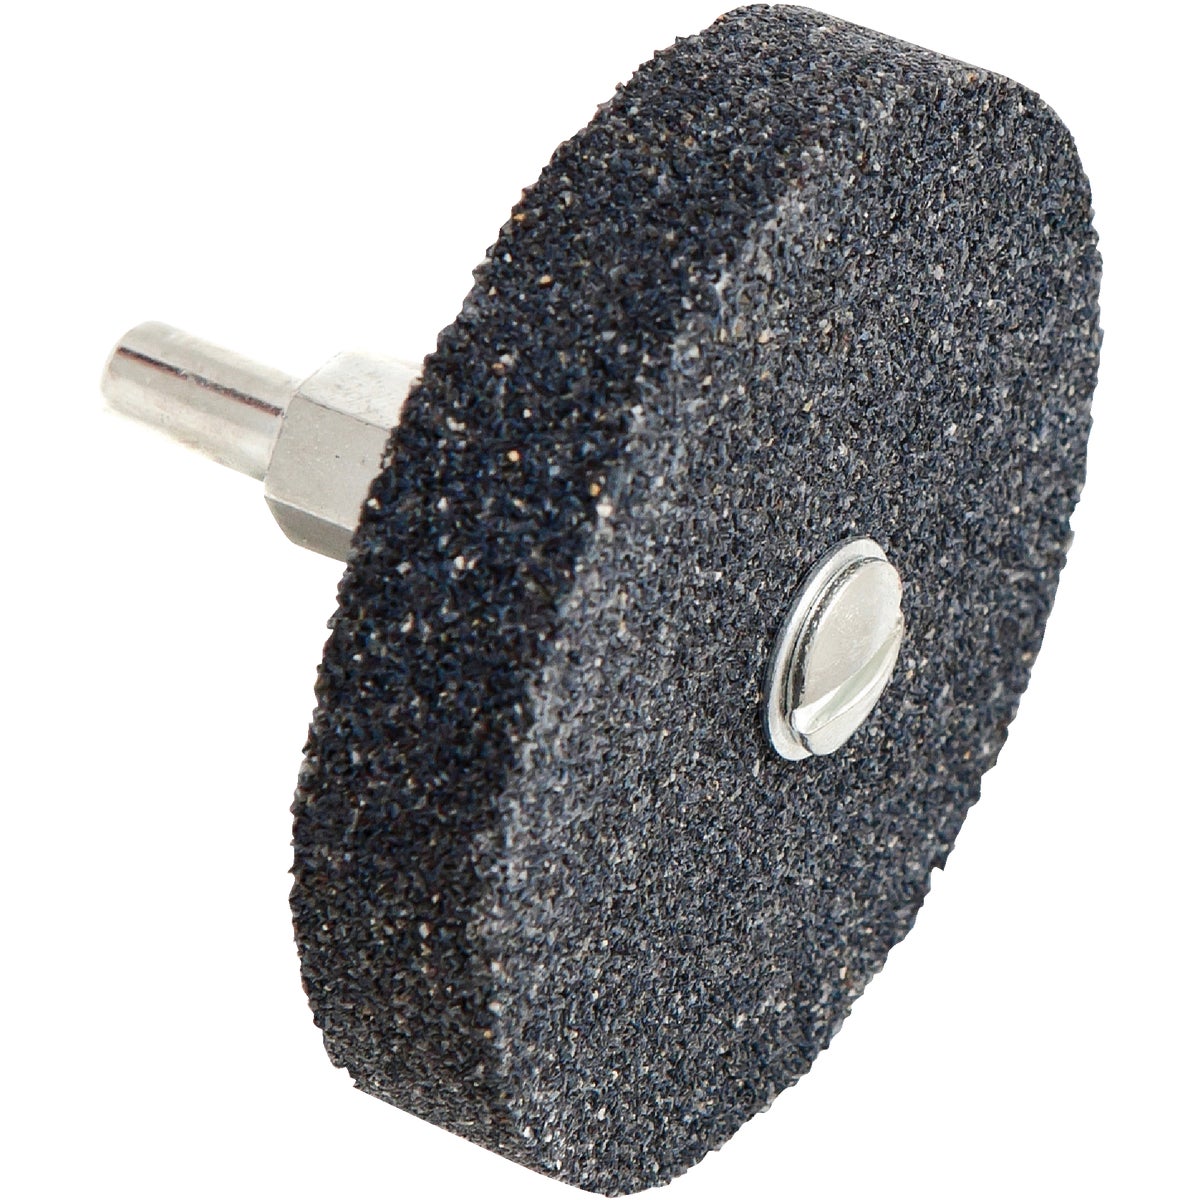 Forney Cylindrical 2-1/2 In. x 1/2 In. Grinding Stone